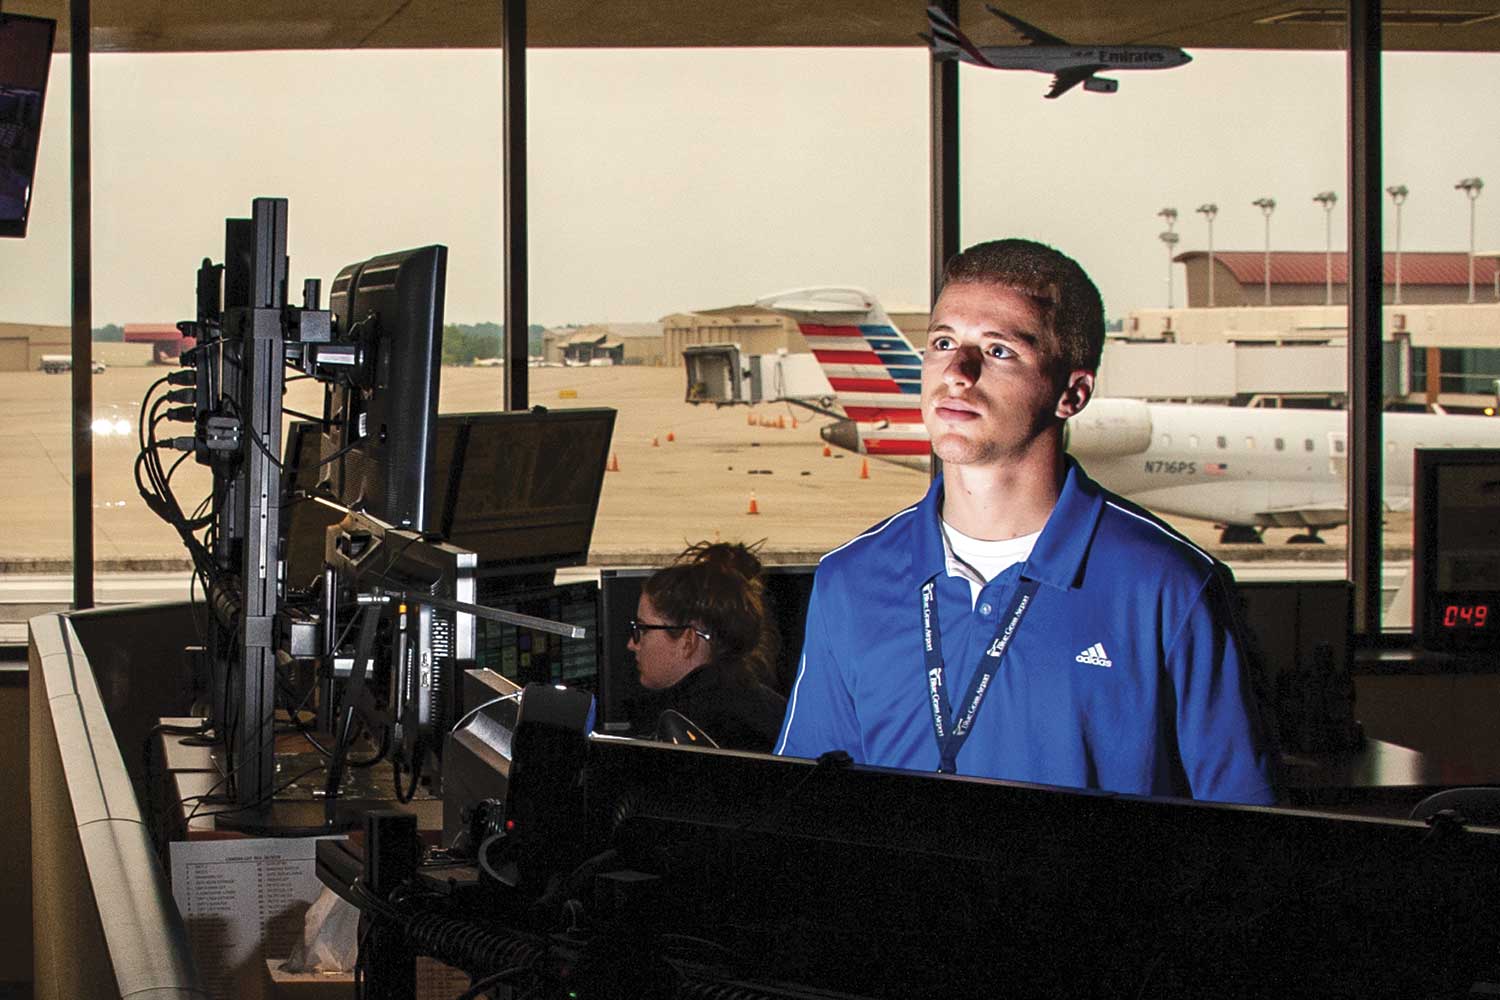  Operations Supervisor Christian Nelson, right, and Operations Specialist Sarah Ryan monitor for an assortment of calls. Operations is in charge of dispatching public safety officers as well as other aspects of airport functions such as maintenance 2